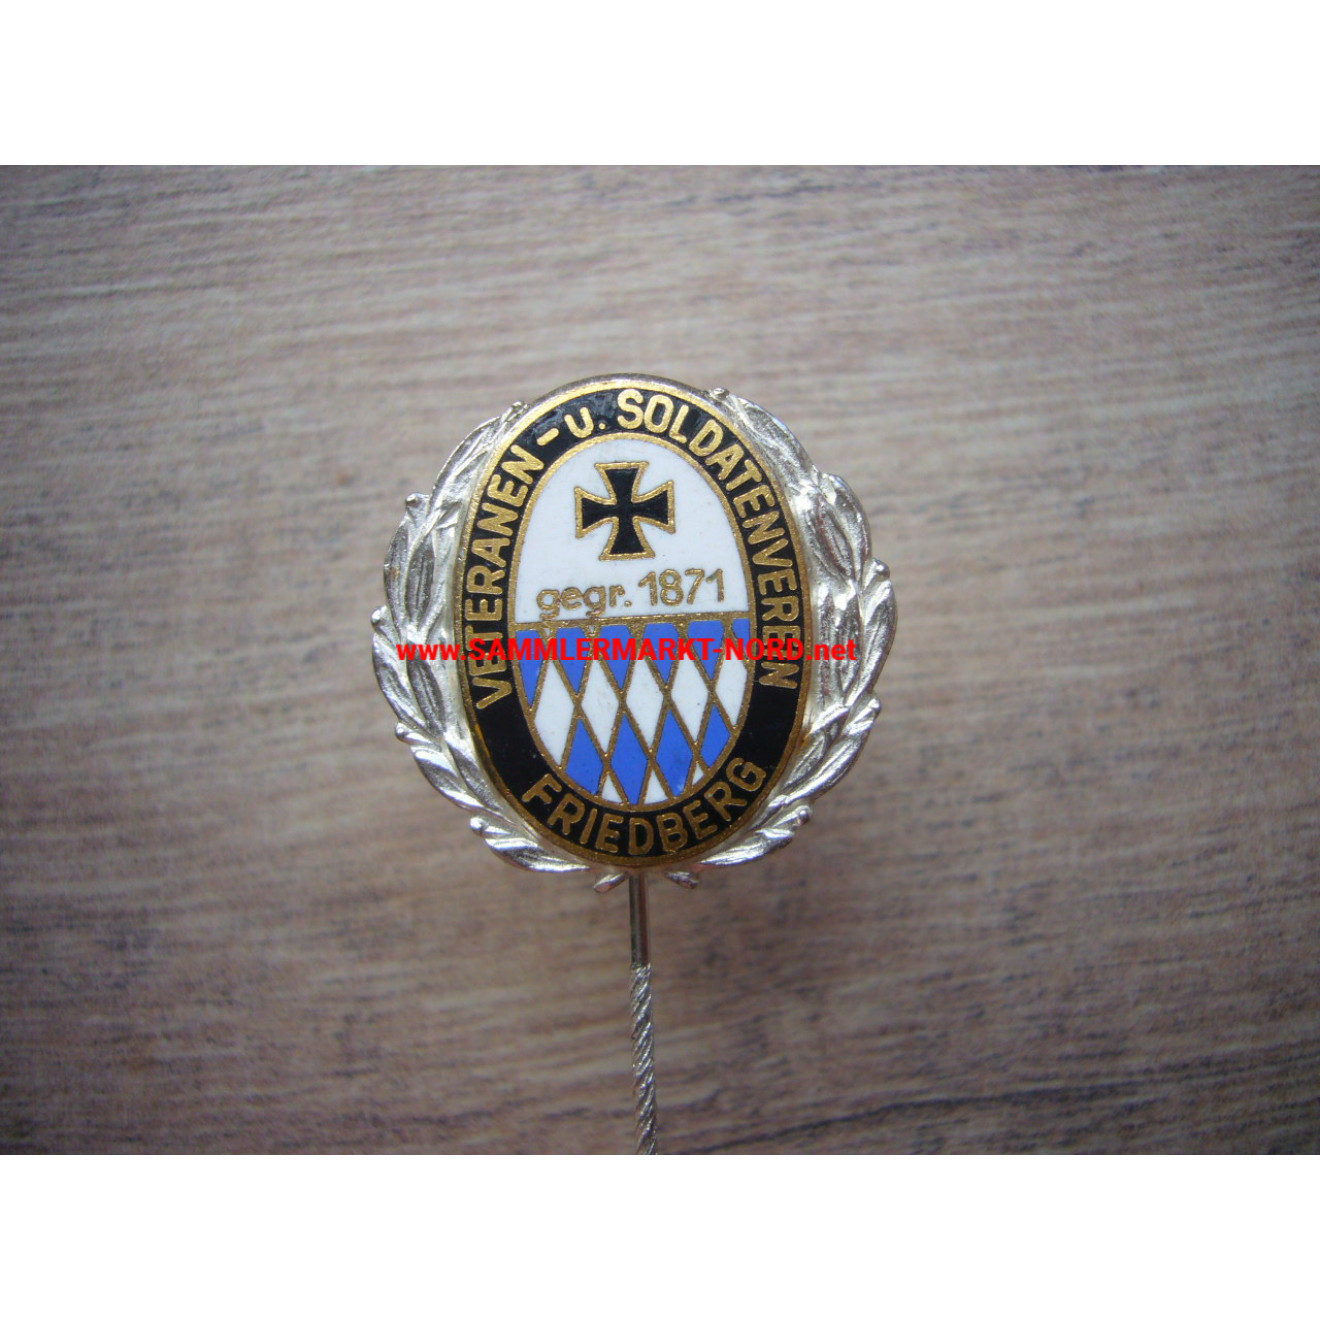 Veterans and Soldiers Association Friedberg 1871 - Silver Badge of Honour